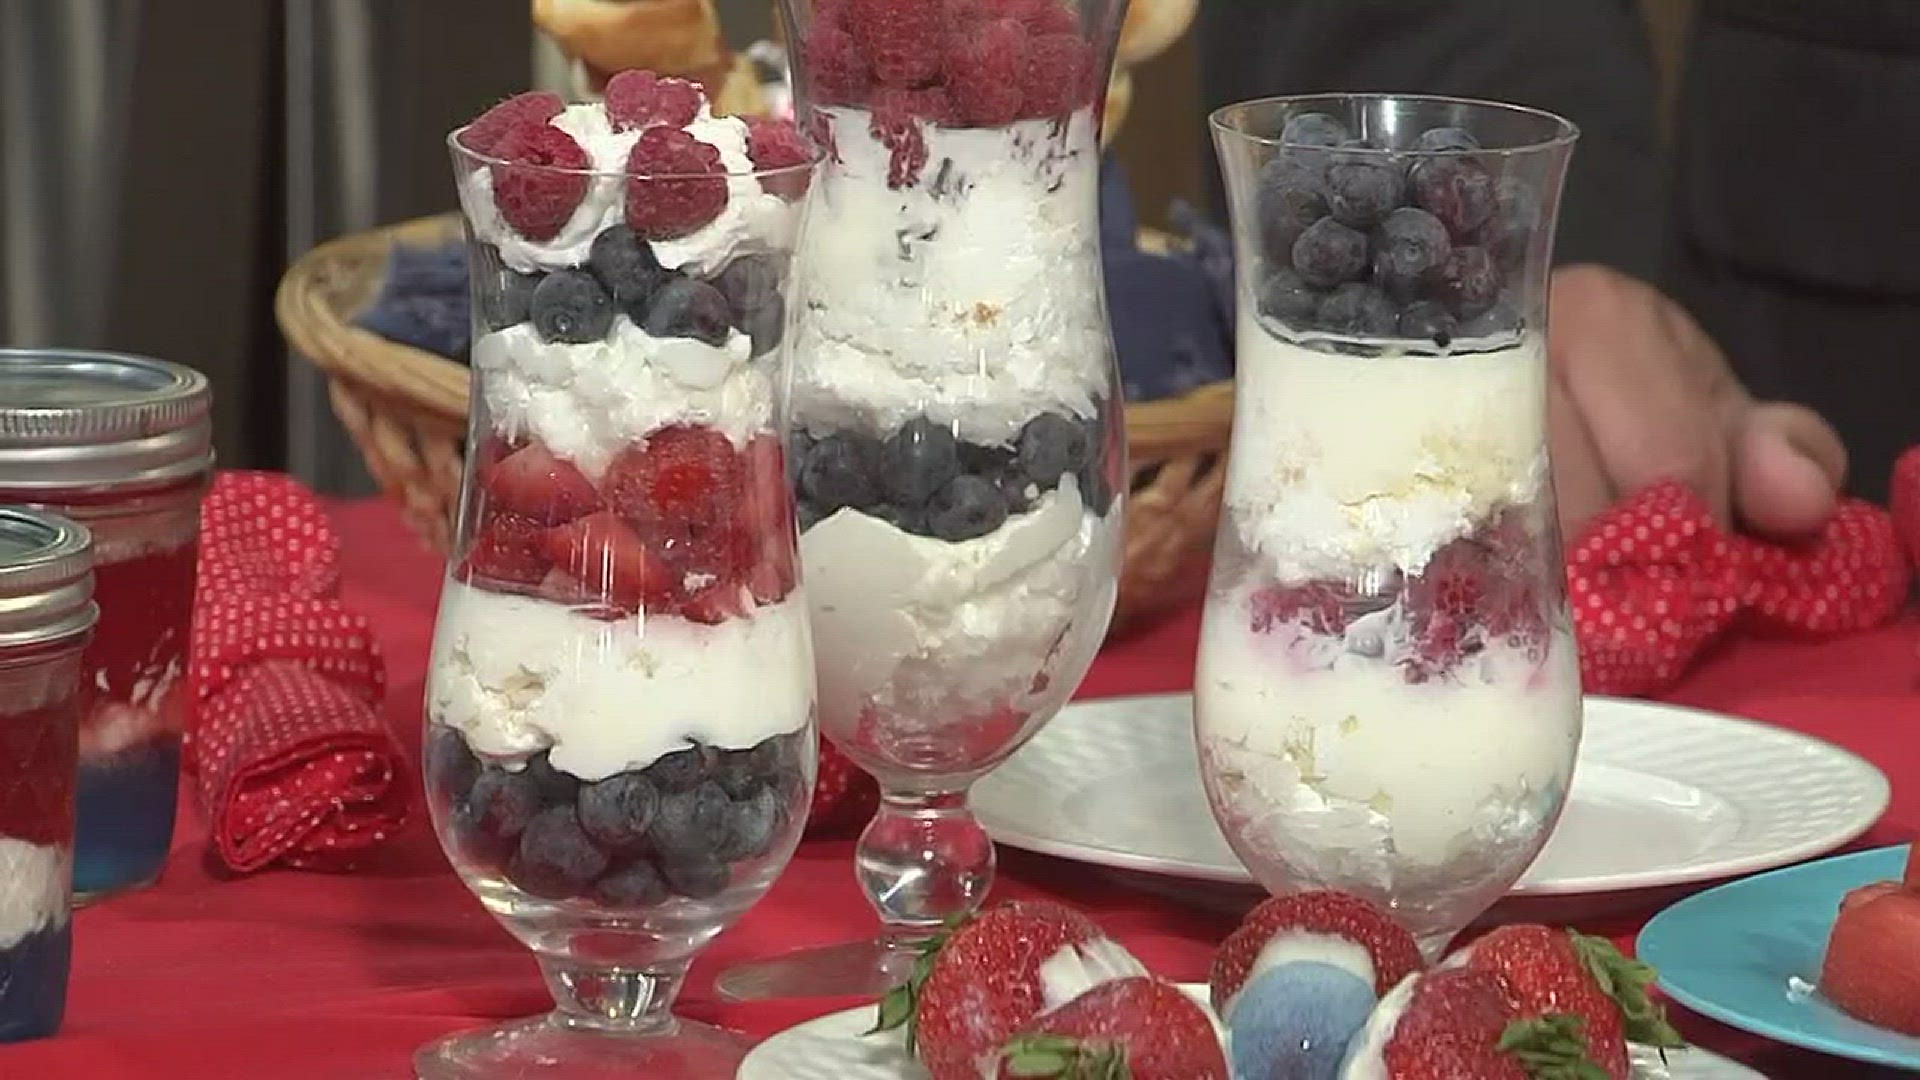 Cooking instructor Terri Geiser shares some red, white, and blue recipes that are perfect for the 4th of July.To learn more about upcoming cooking classes at the University of Tennessee visit rhtm.utk.edu/ut-culinary-community-cooking-coursesJune 19, 20